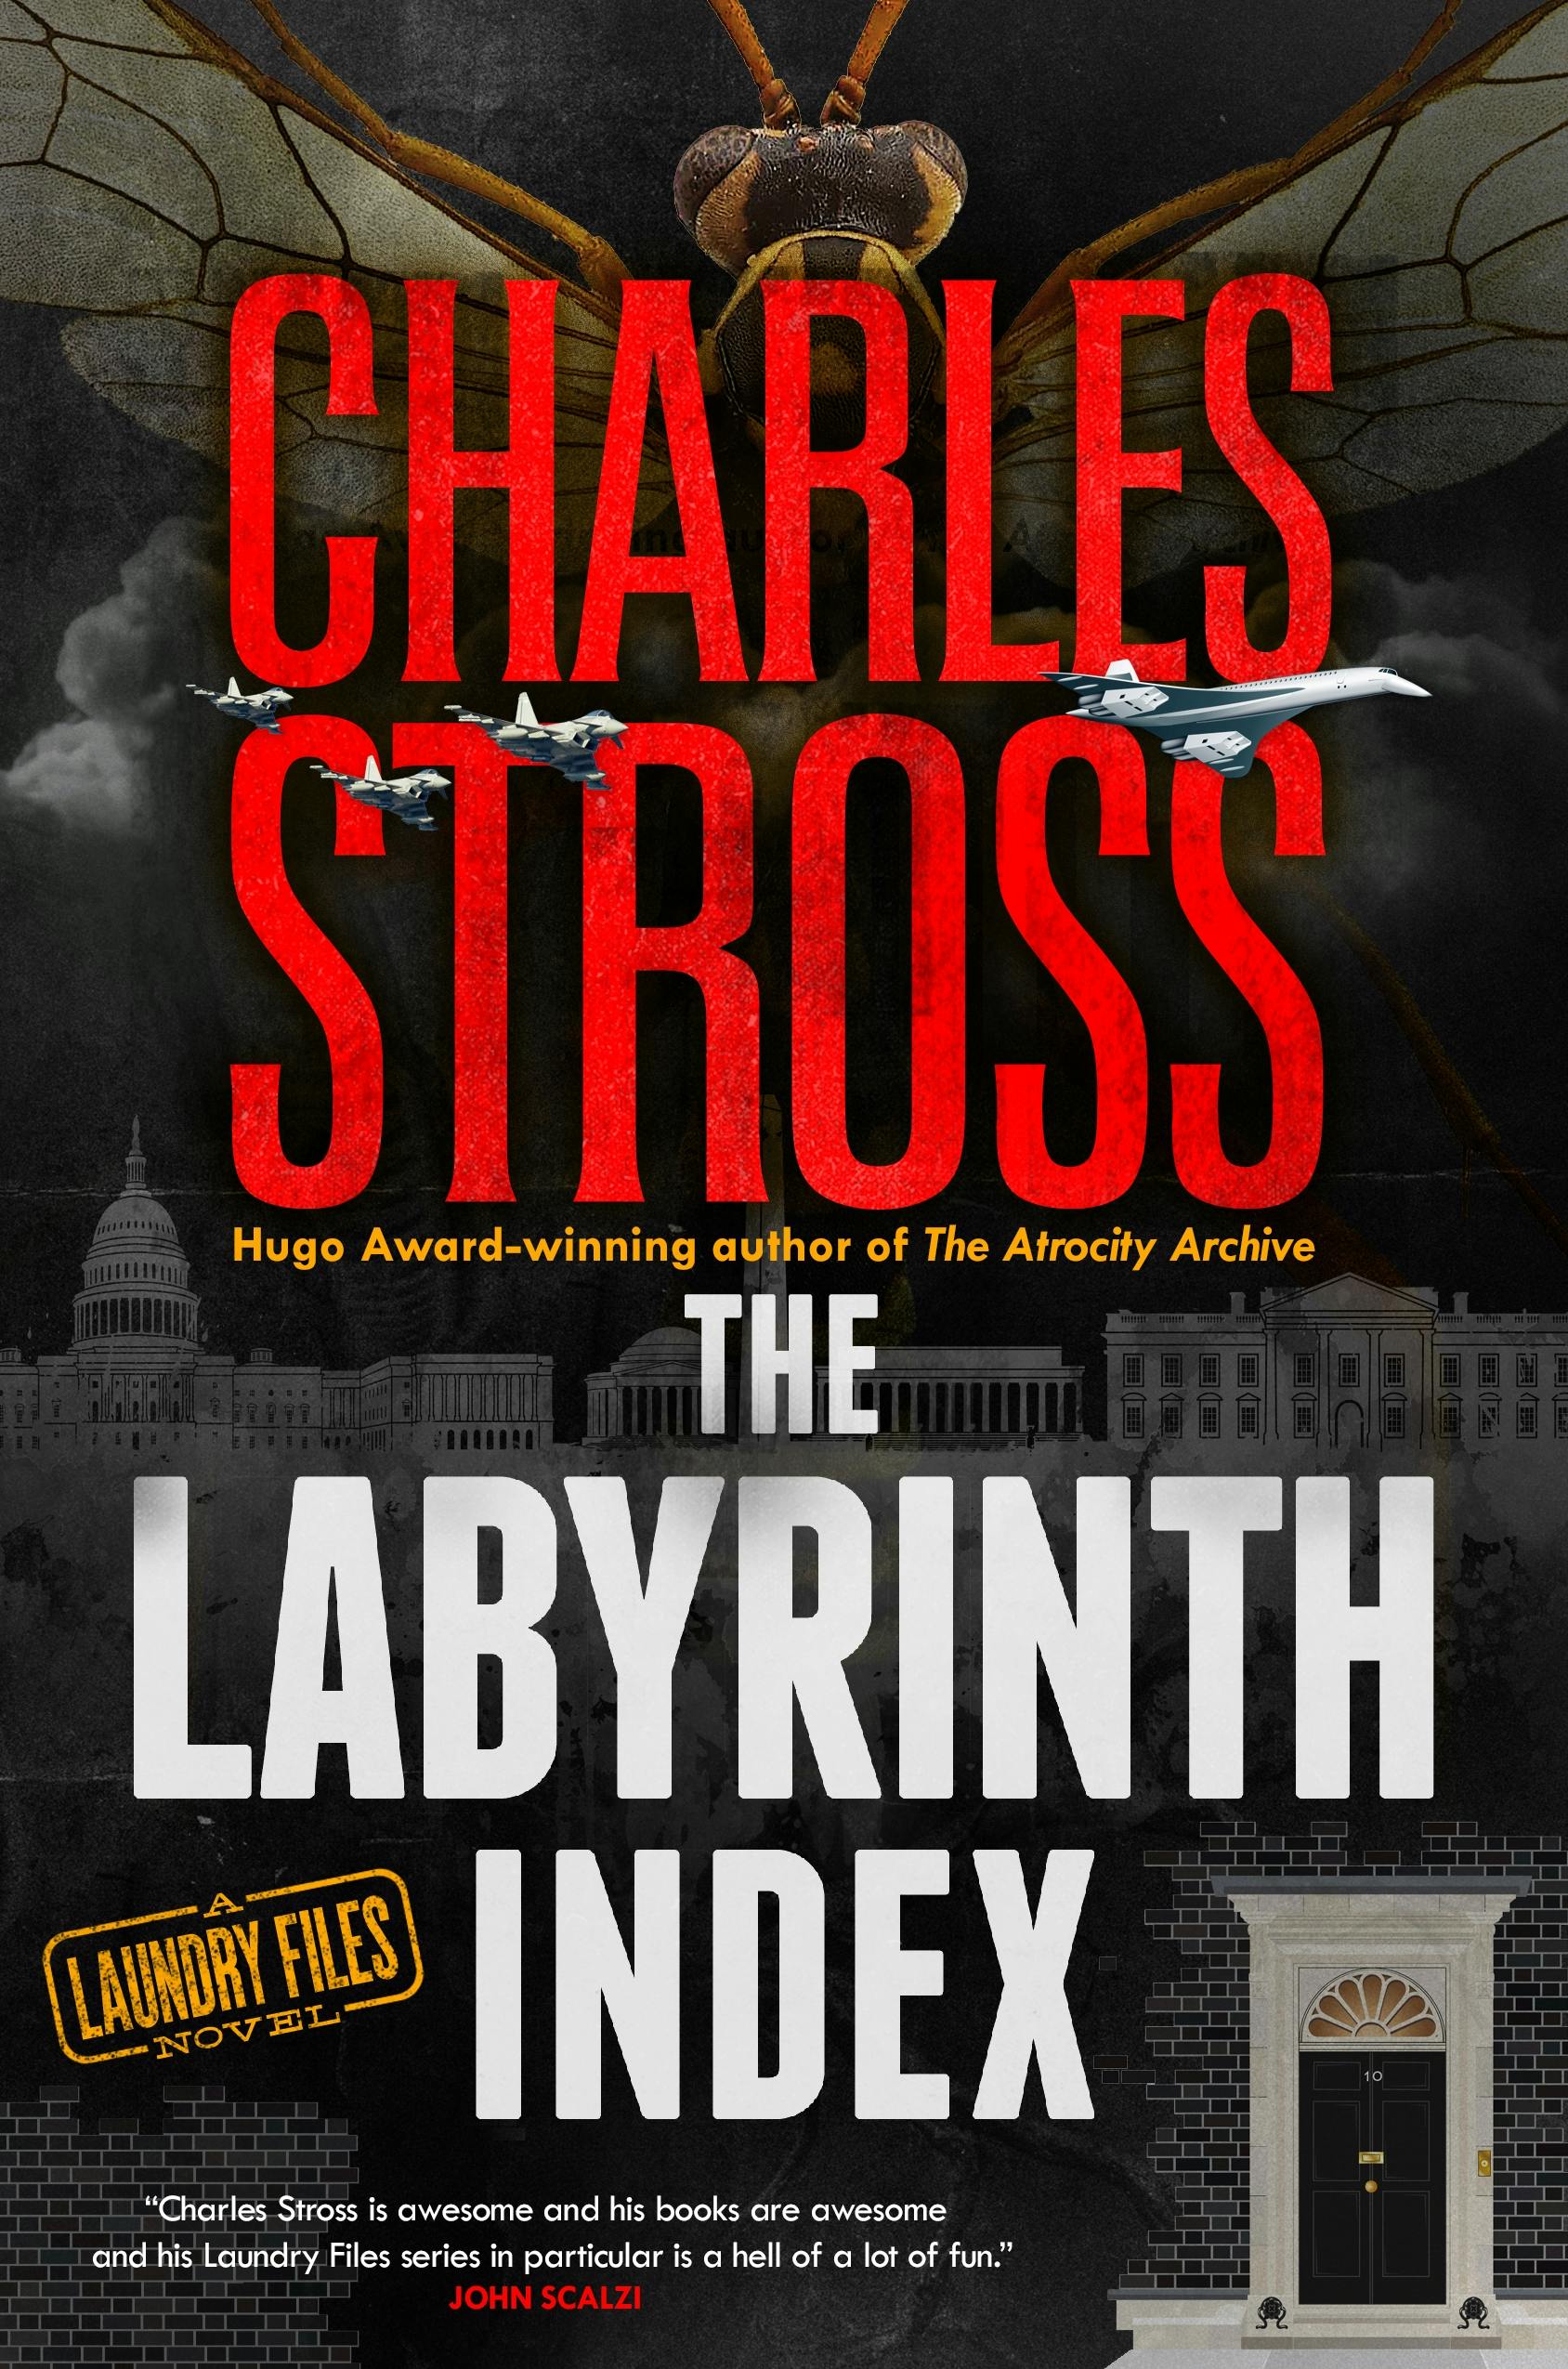 Cover for the book titled as: The Labyrinth Index